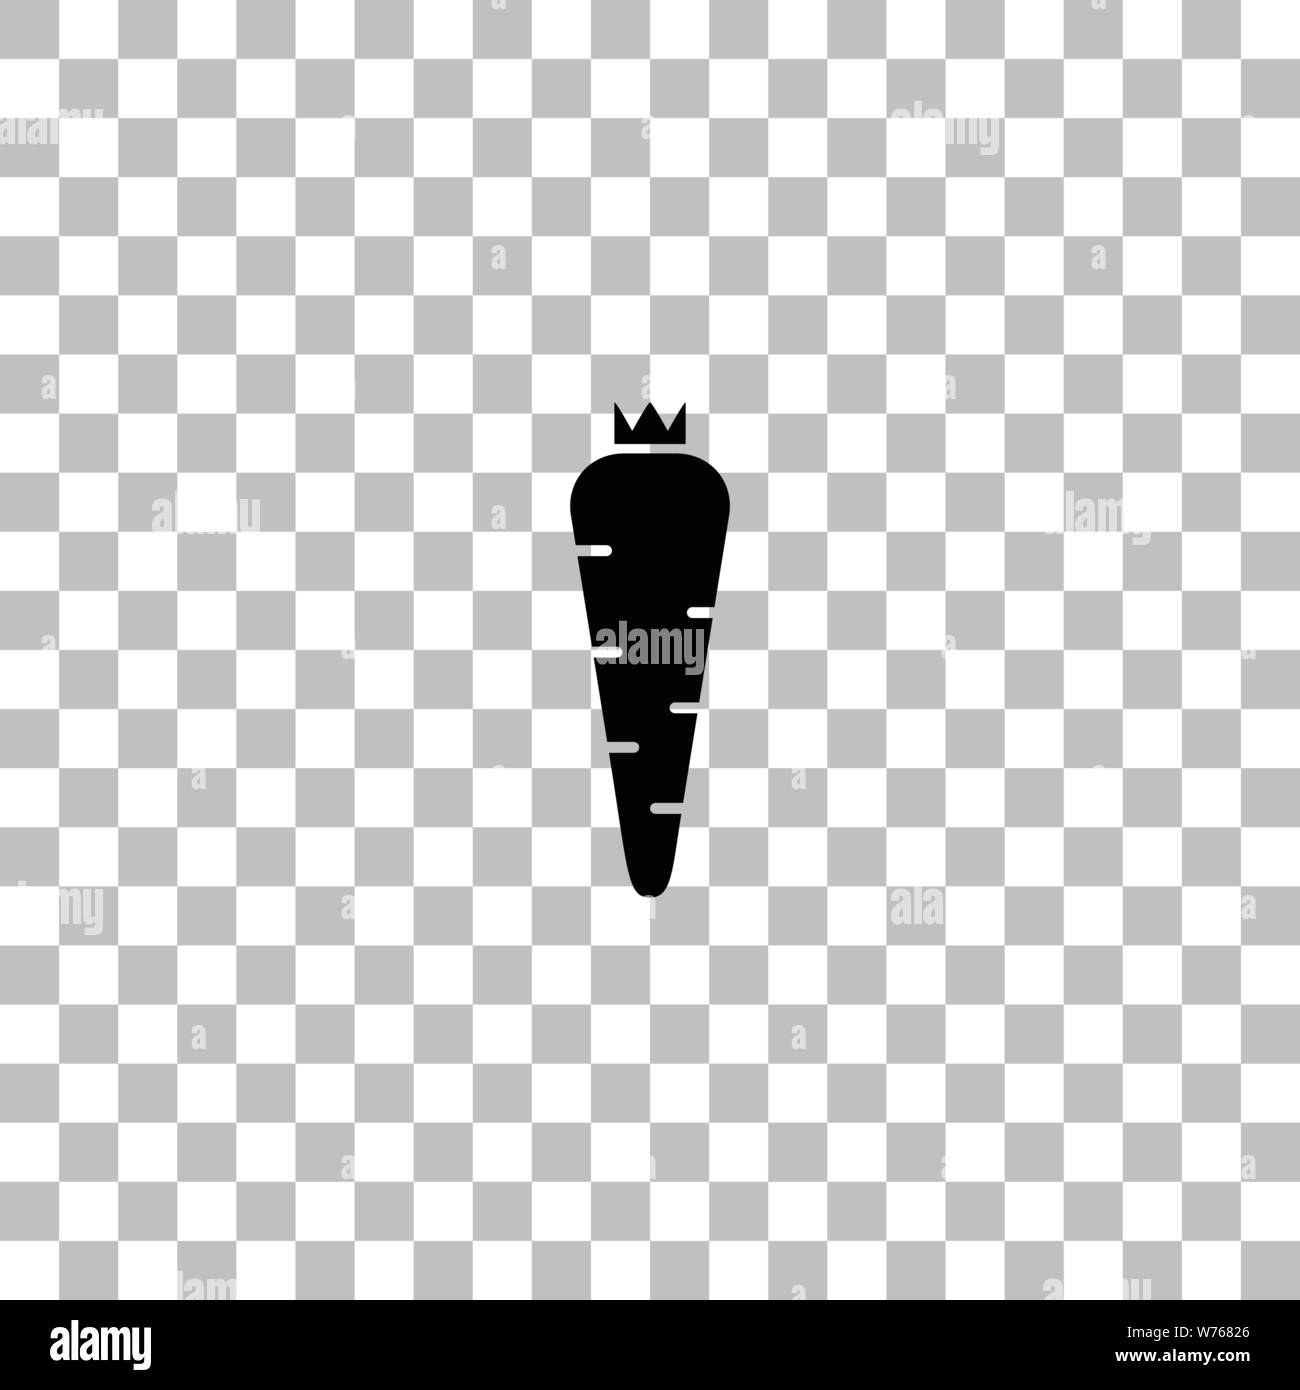 Carrot. Black flat icon on a transparent background. Pictogram for your project Stock Vector